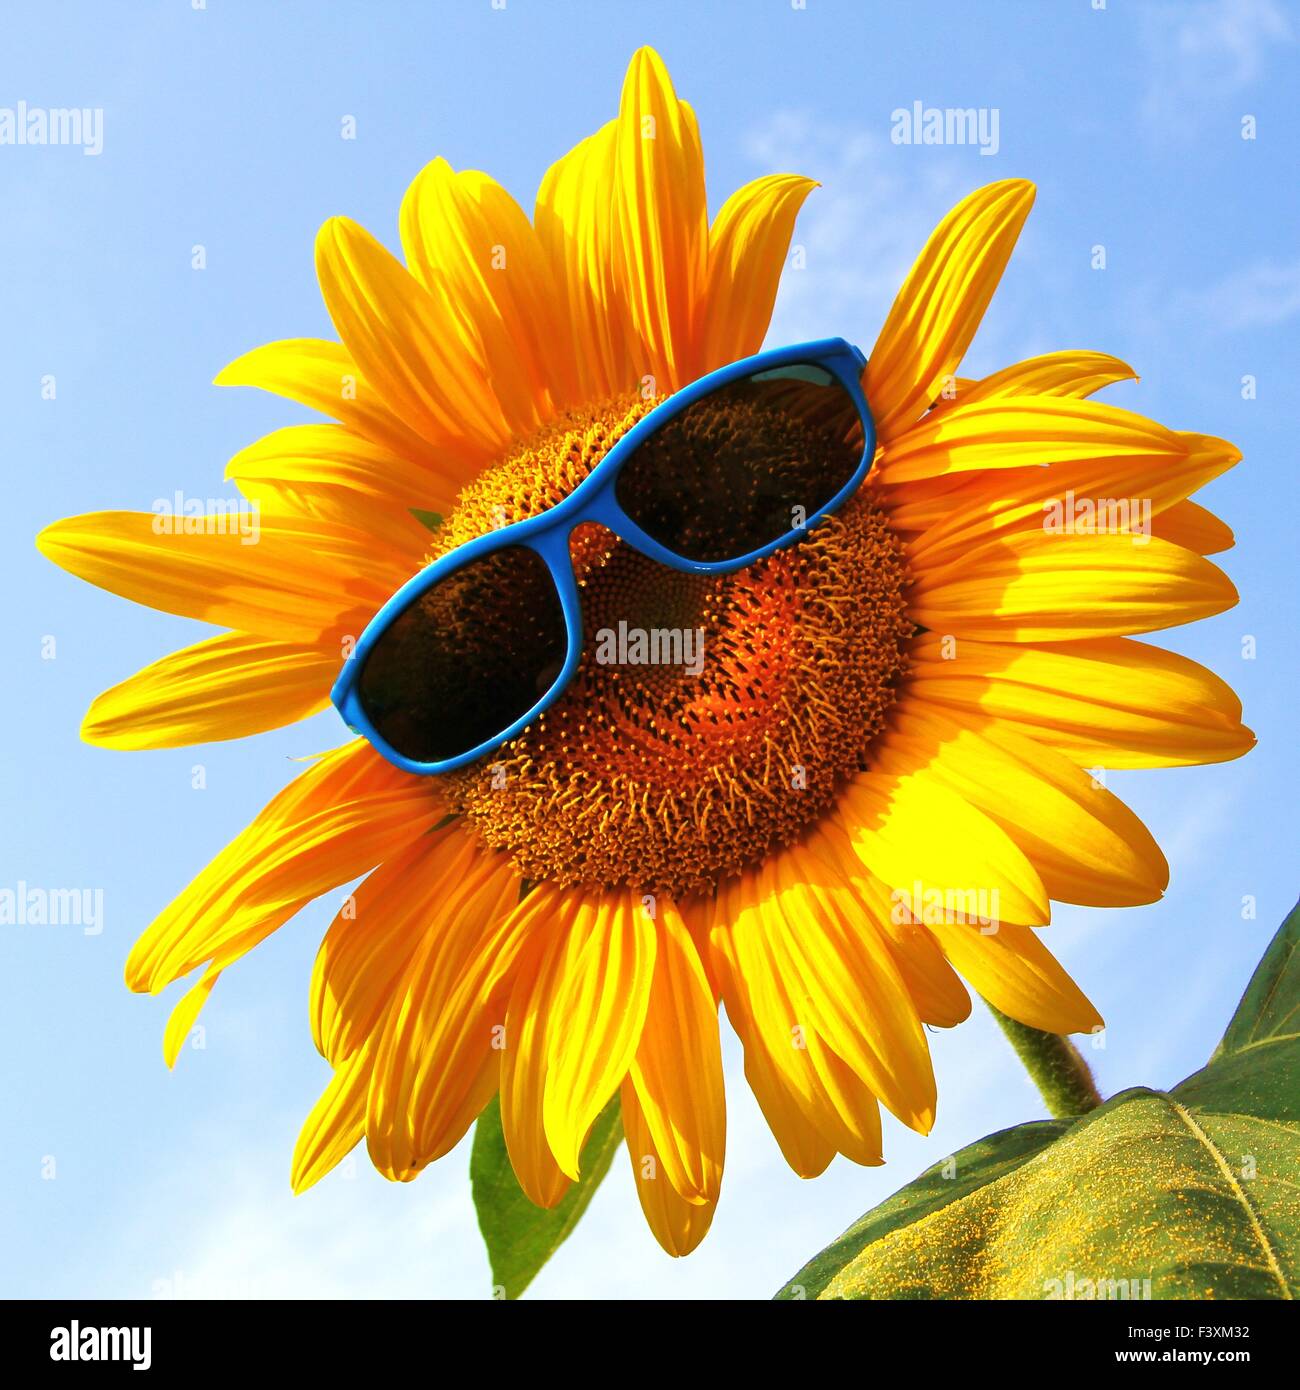 funny sunflower with sunglasses Stock Photo